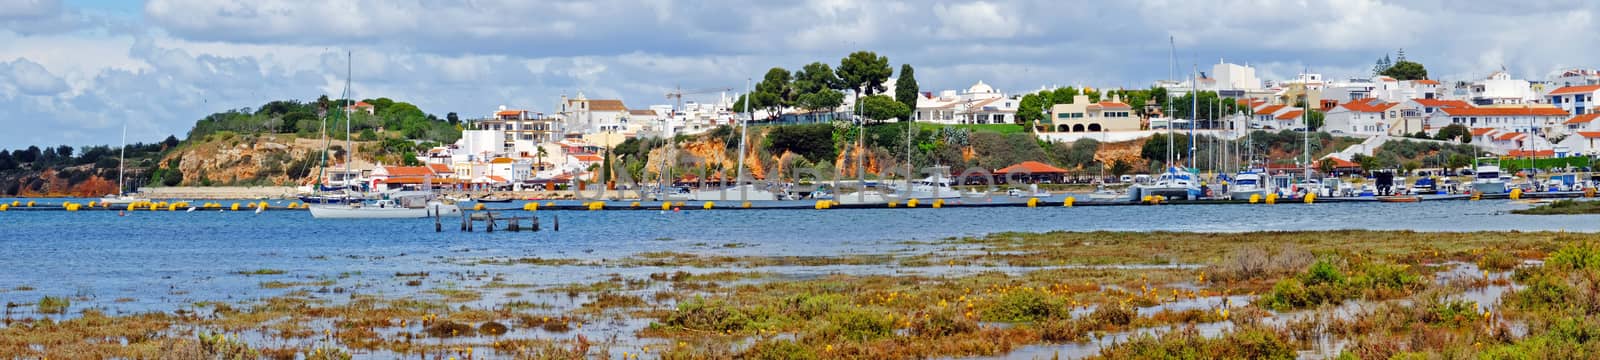 Harbor from Alvor in the Algarve Portugal by devy